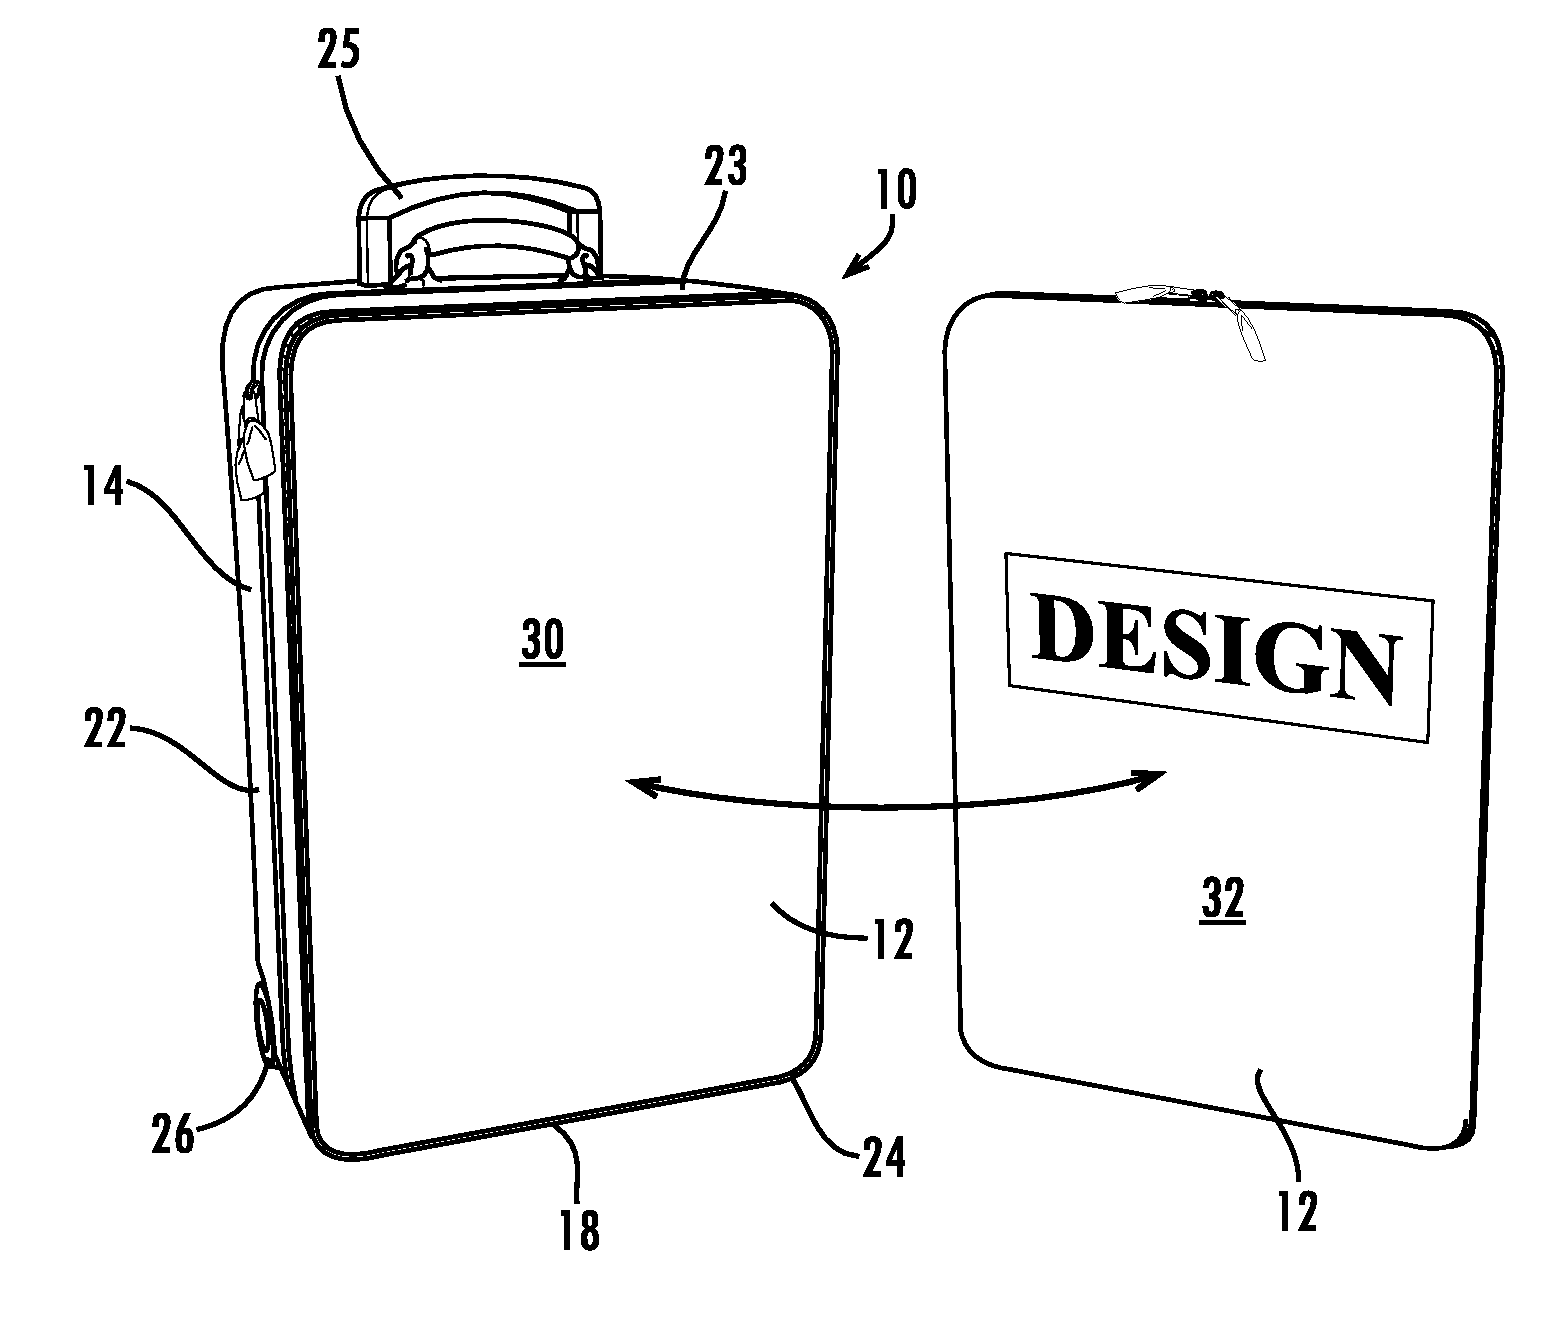 Convertible luggage and a reversible panel therefor